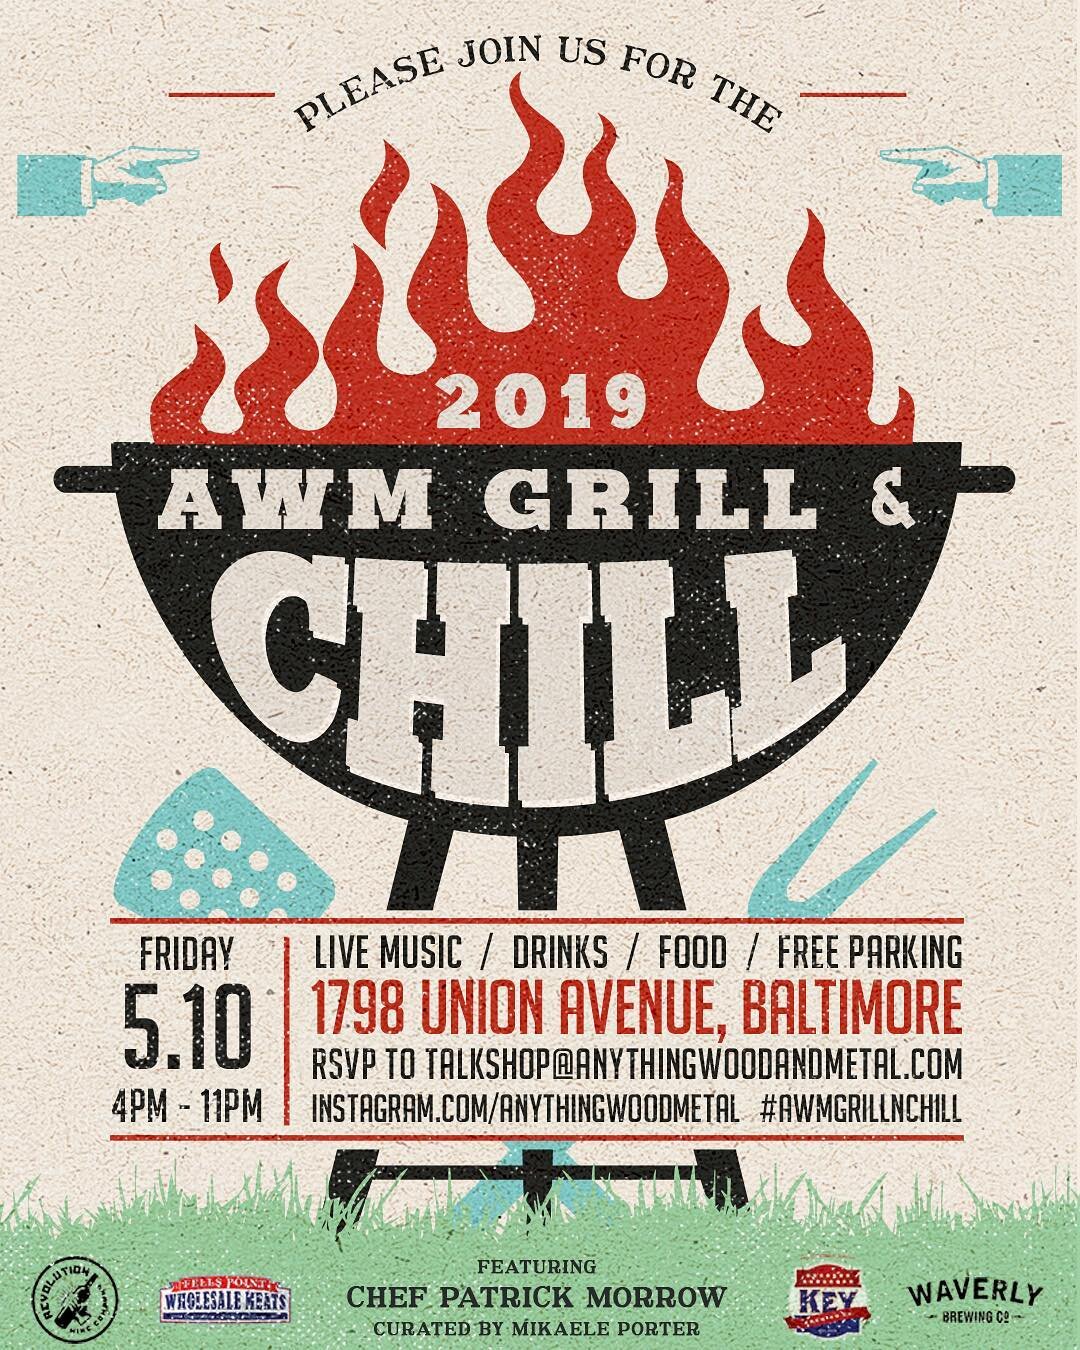 Join us for our 3rd annual #AWMGrillNChill on 05.10.19! Live music, local bevs, small goods for purchase, and @chef_morrow on the #grillzilla 👌🏼👌🏼 RSVP today to claim a spot!!